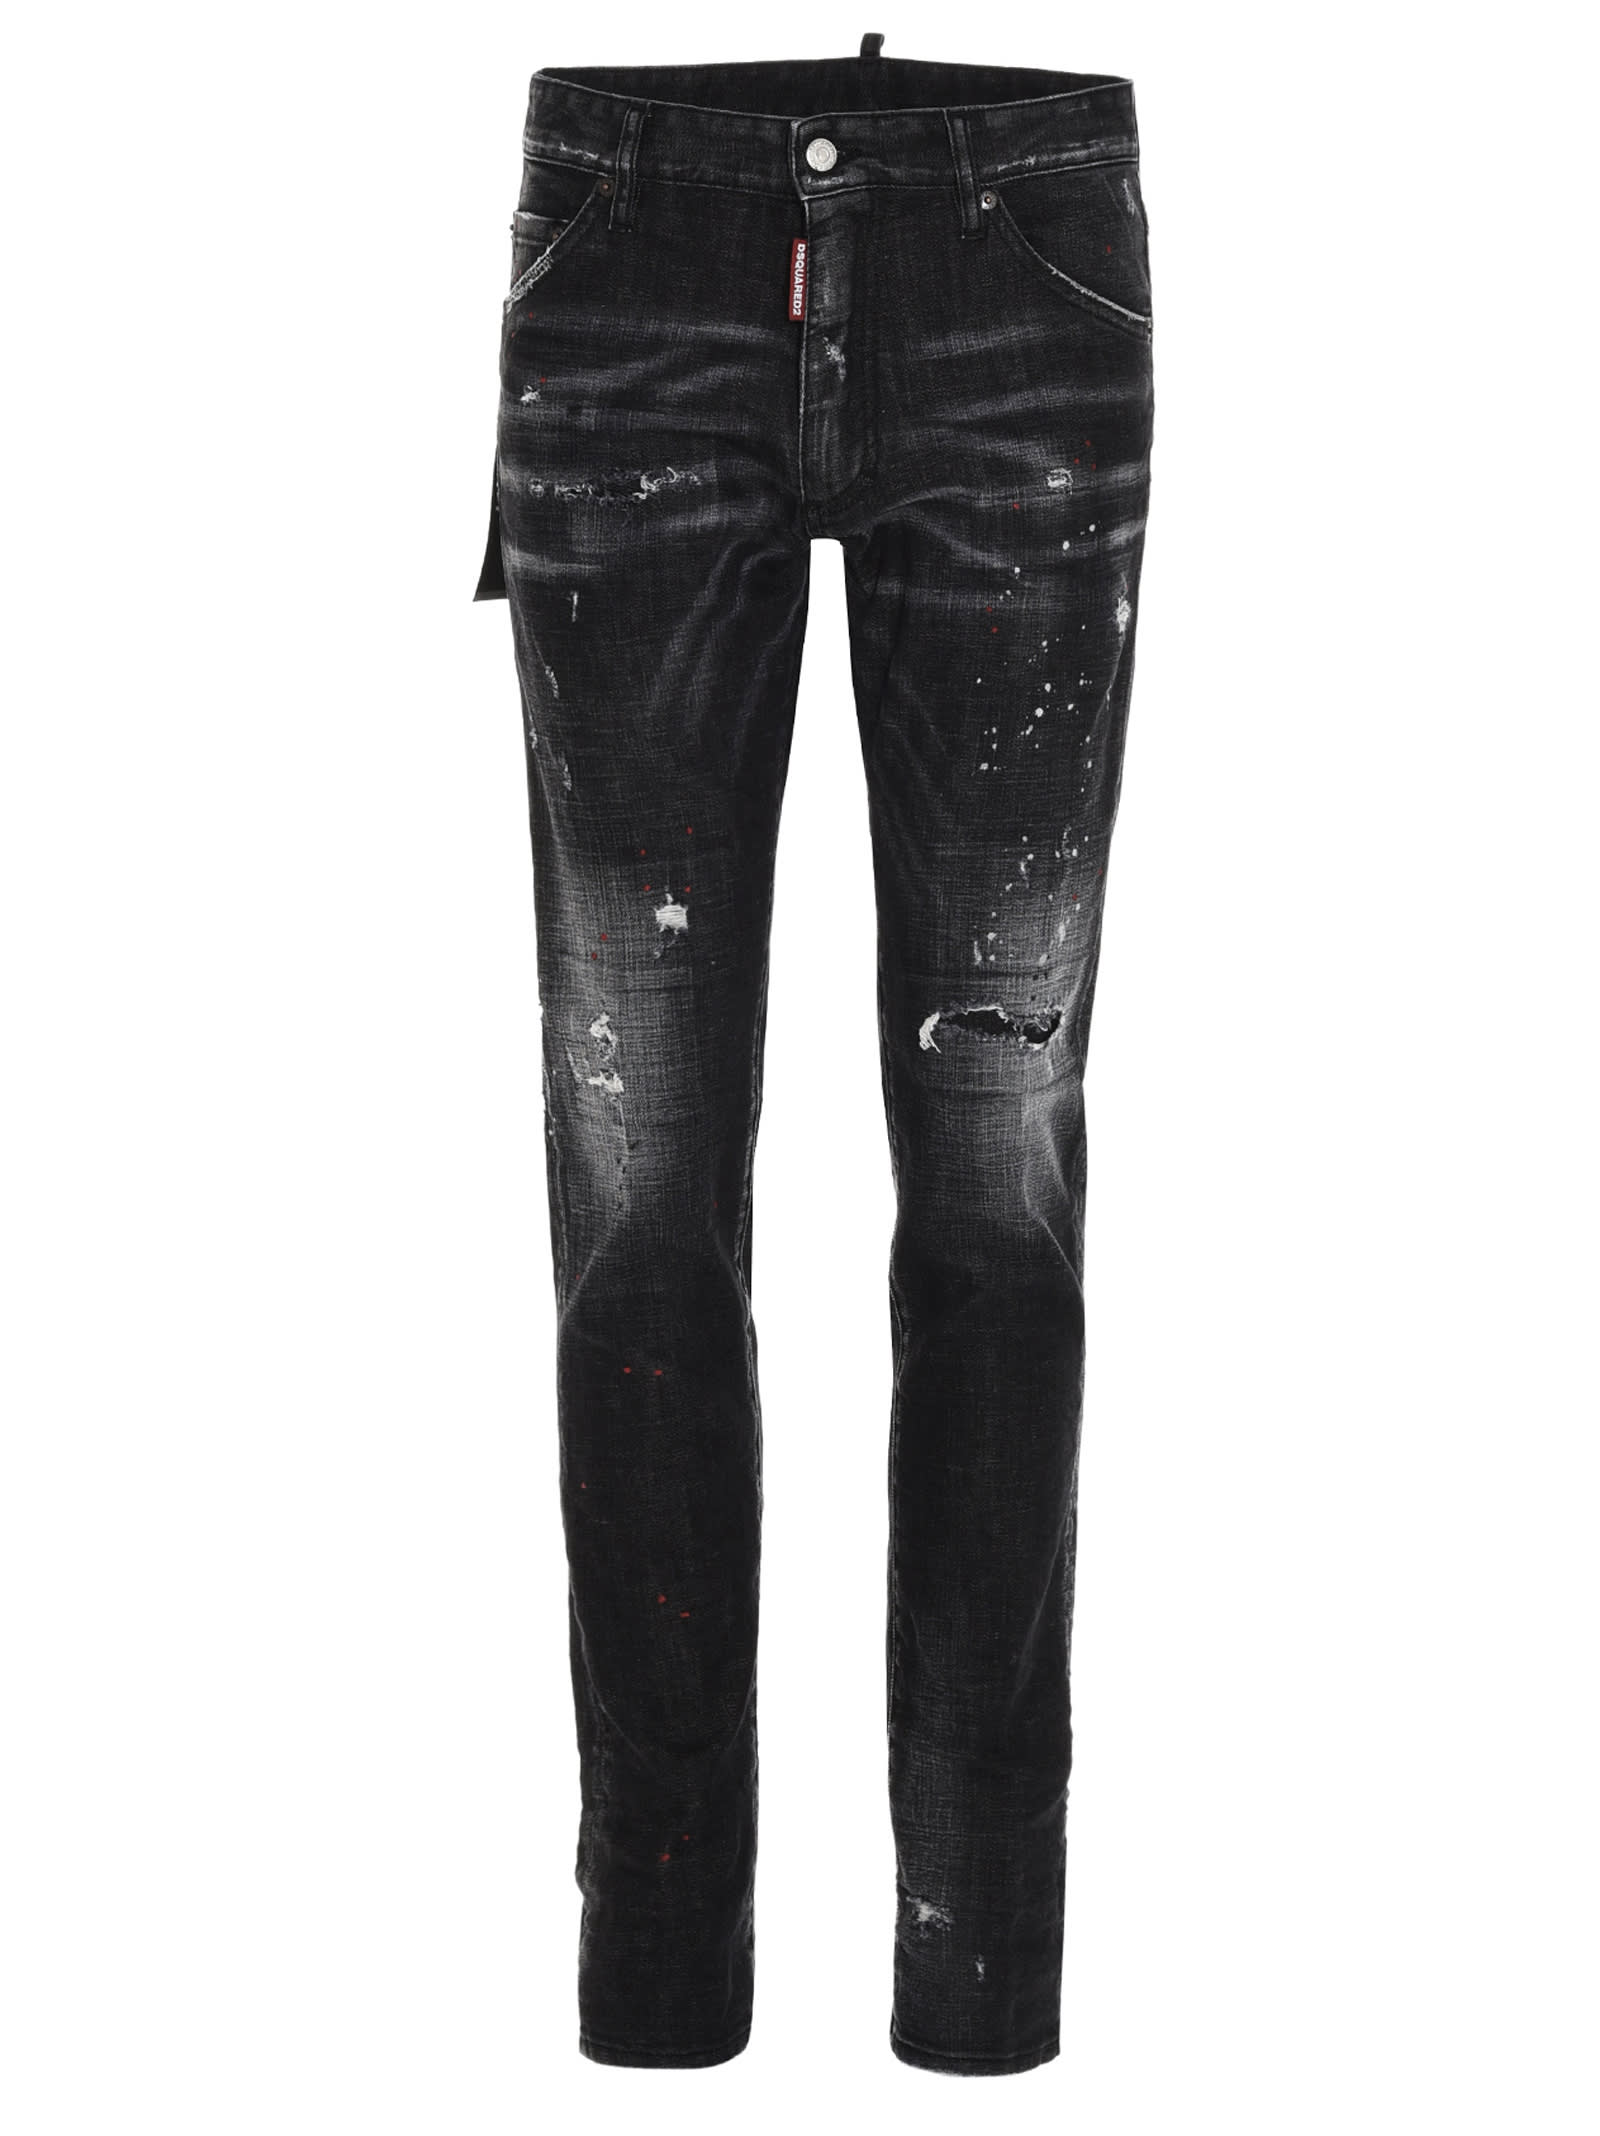 DSQUARED2 COOL GUY JEANS,S74LB0878S30357 900